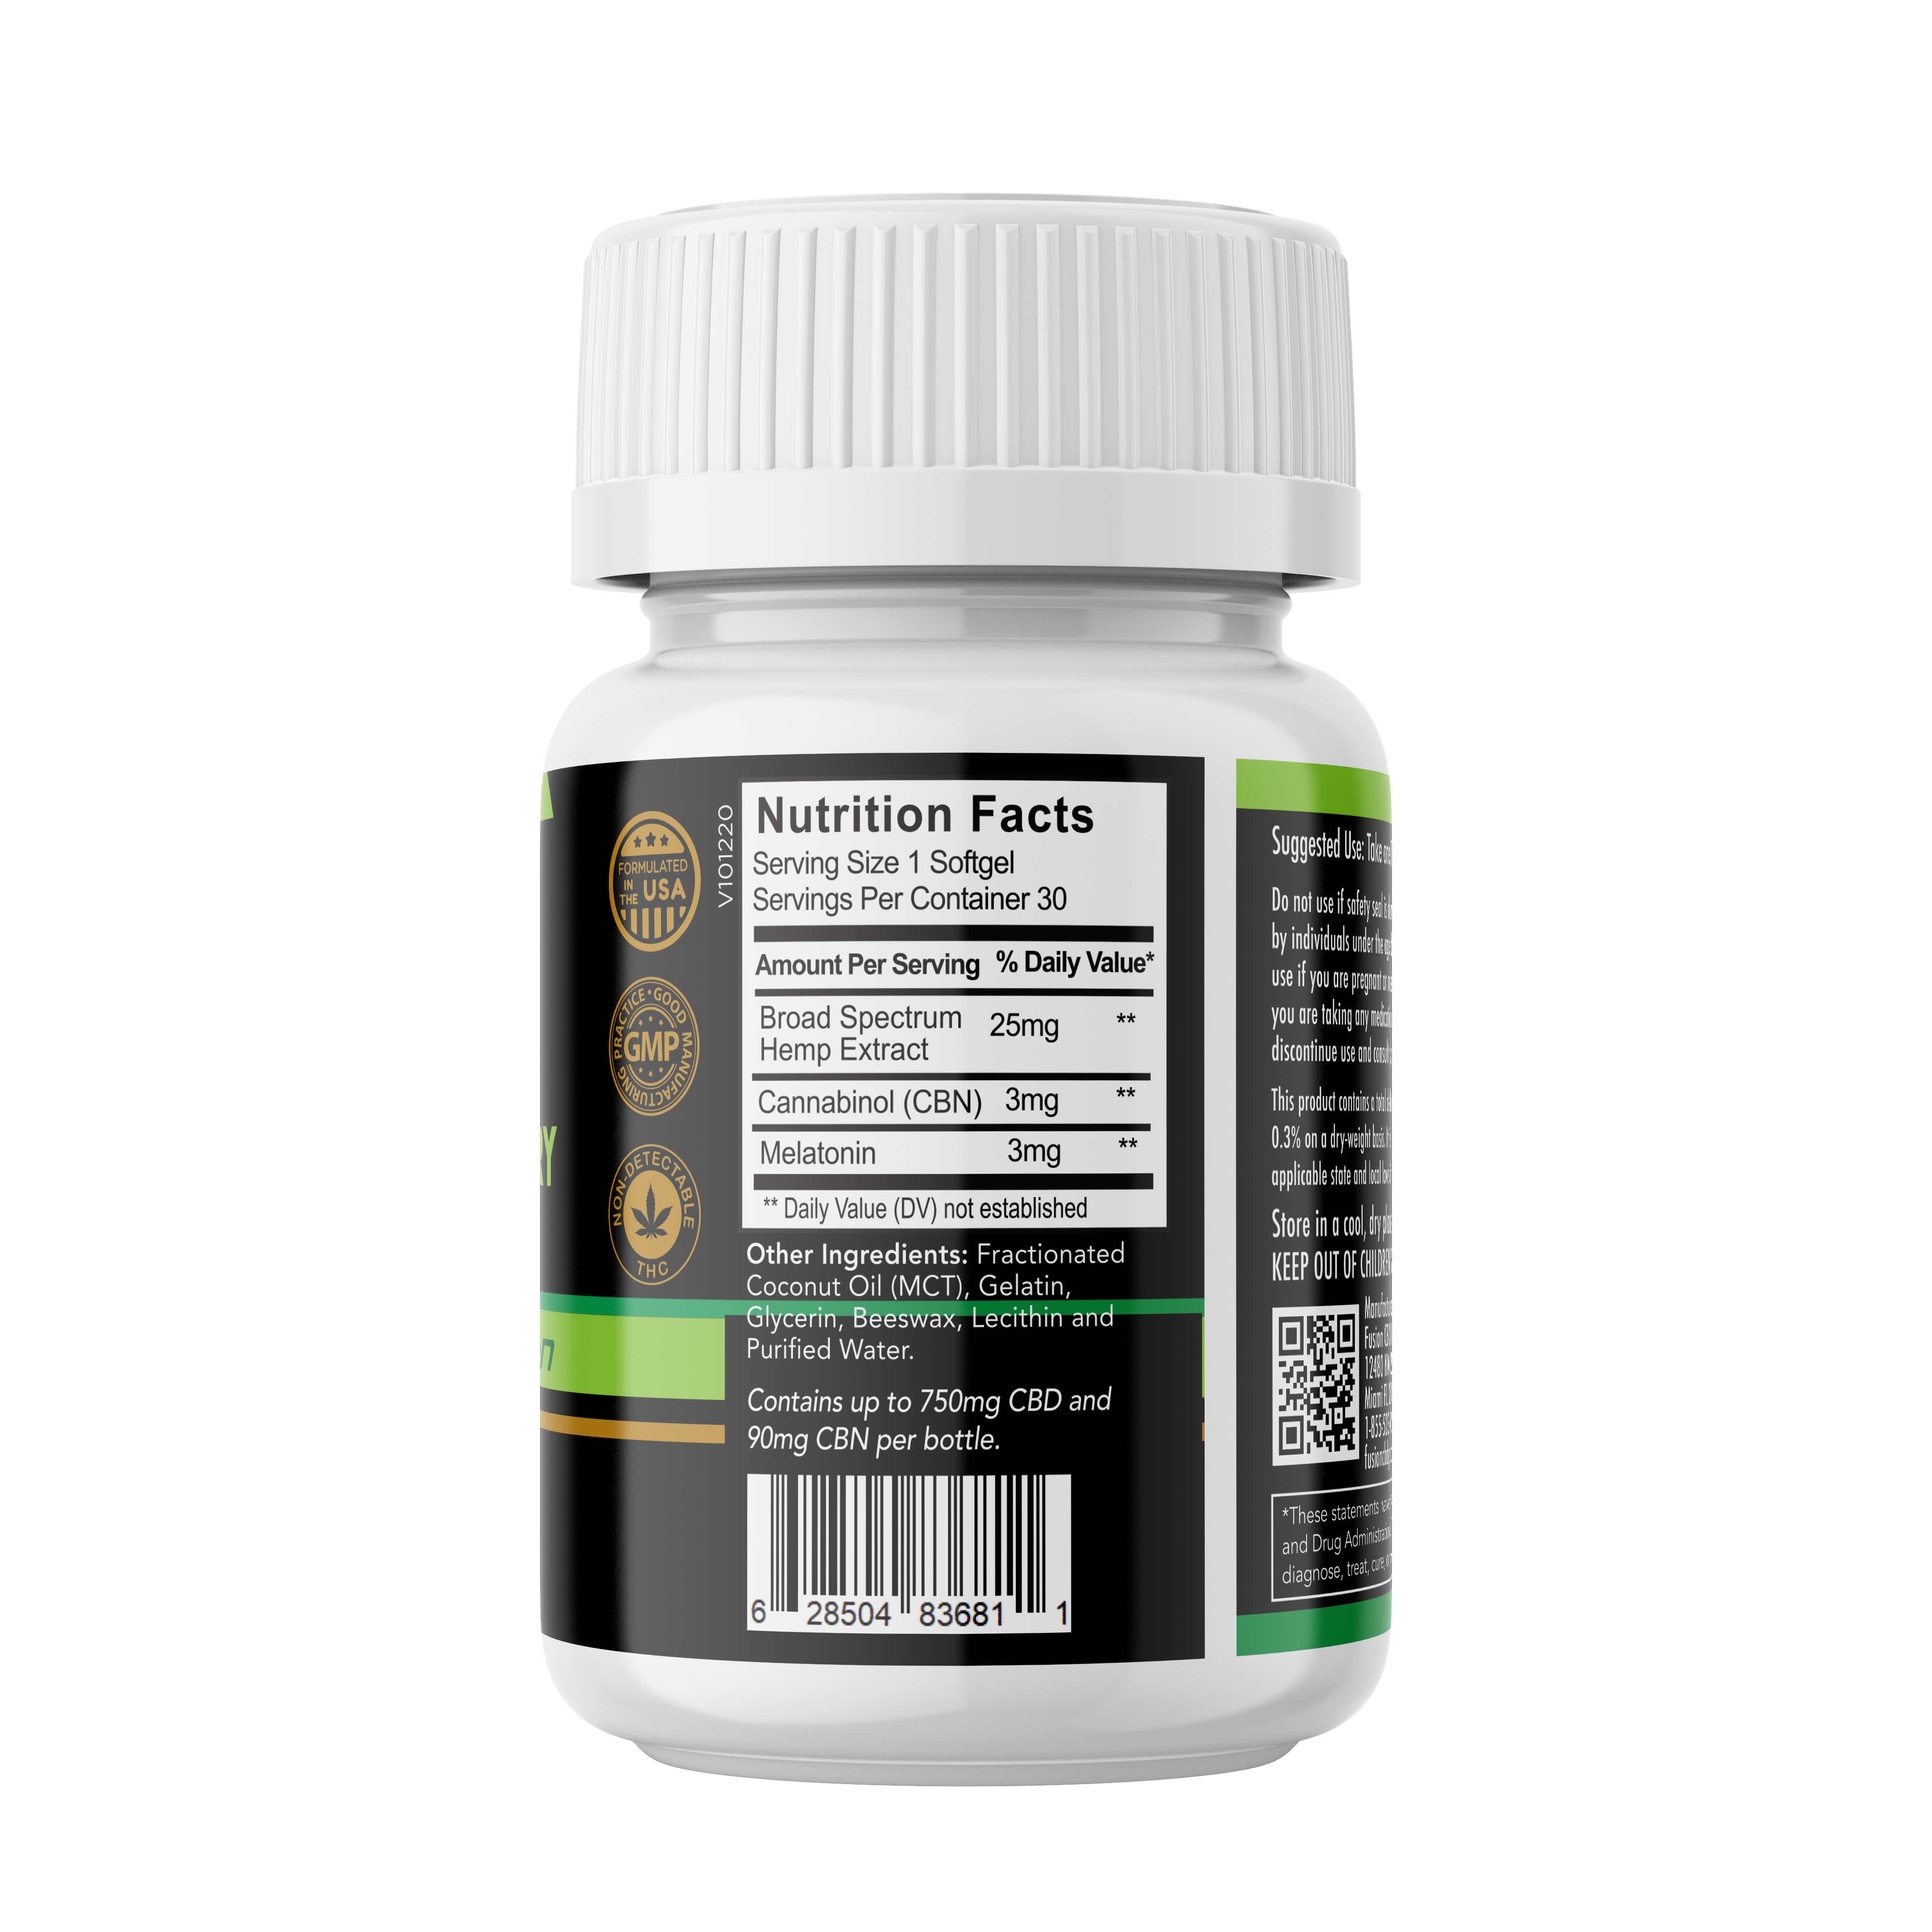 fusion-sleep-recovery-softgels